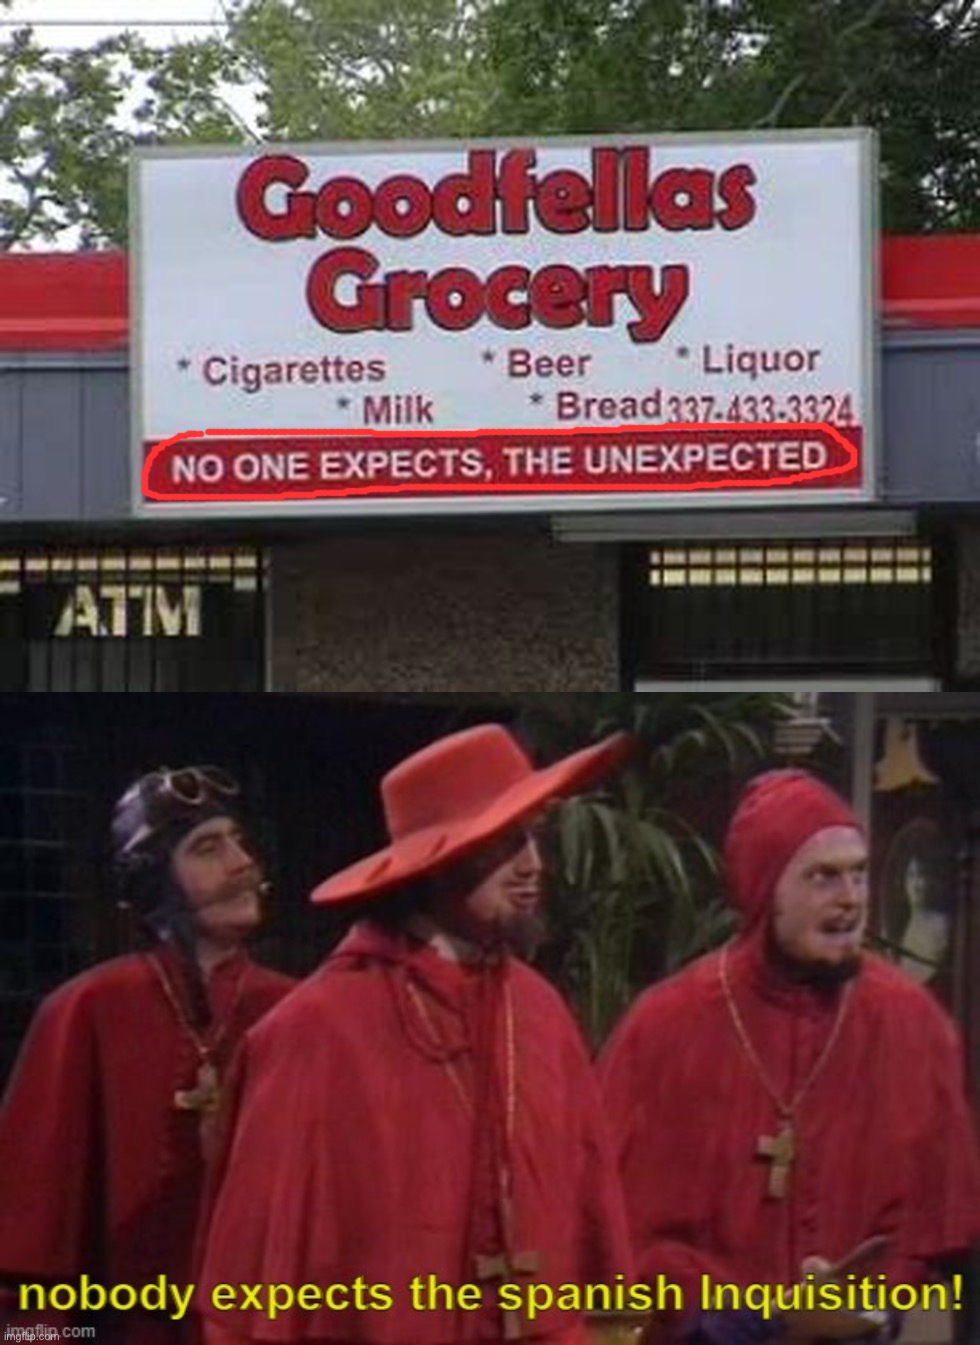 Remember what movie this was from? | image tagged in nobody expects the spanish inquisition text,memes,funny,spanish inquisition,monty python,funny signs | made w/ Imgflip meme maker